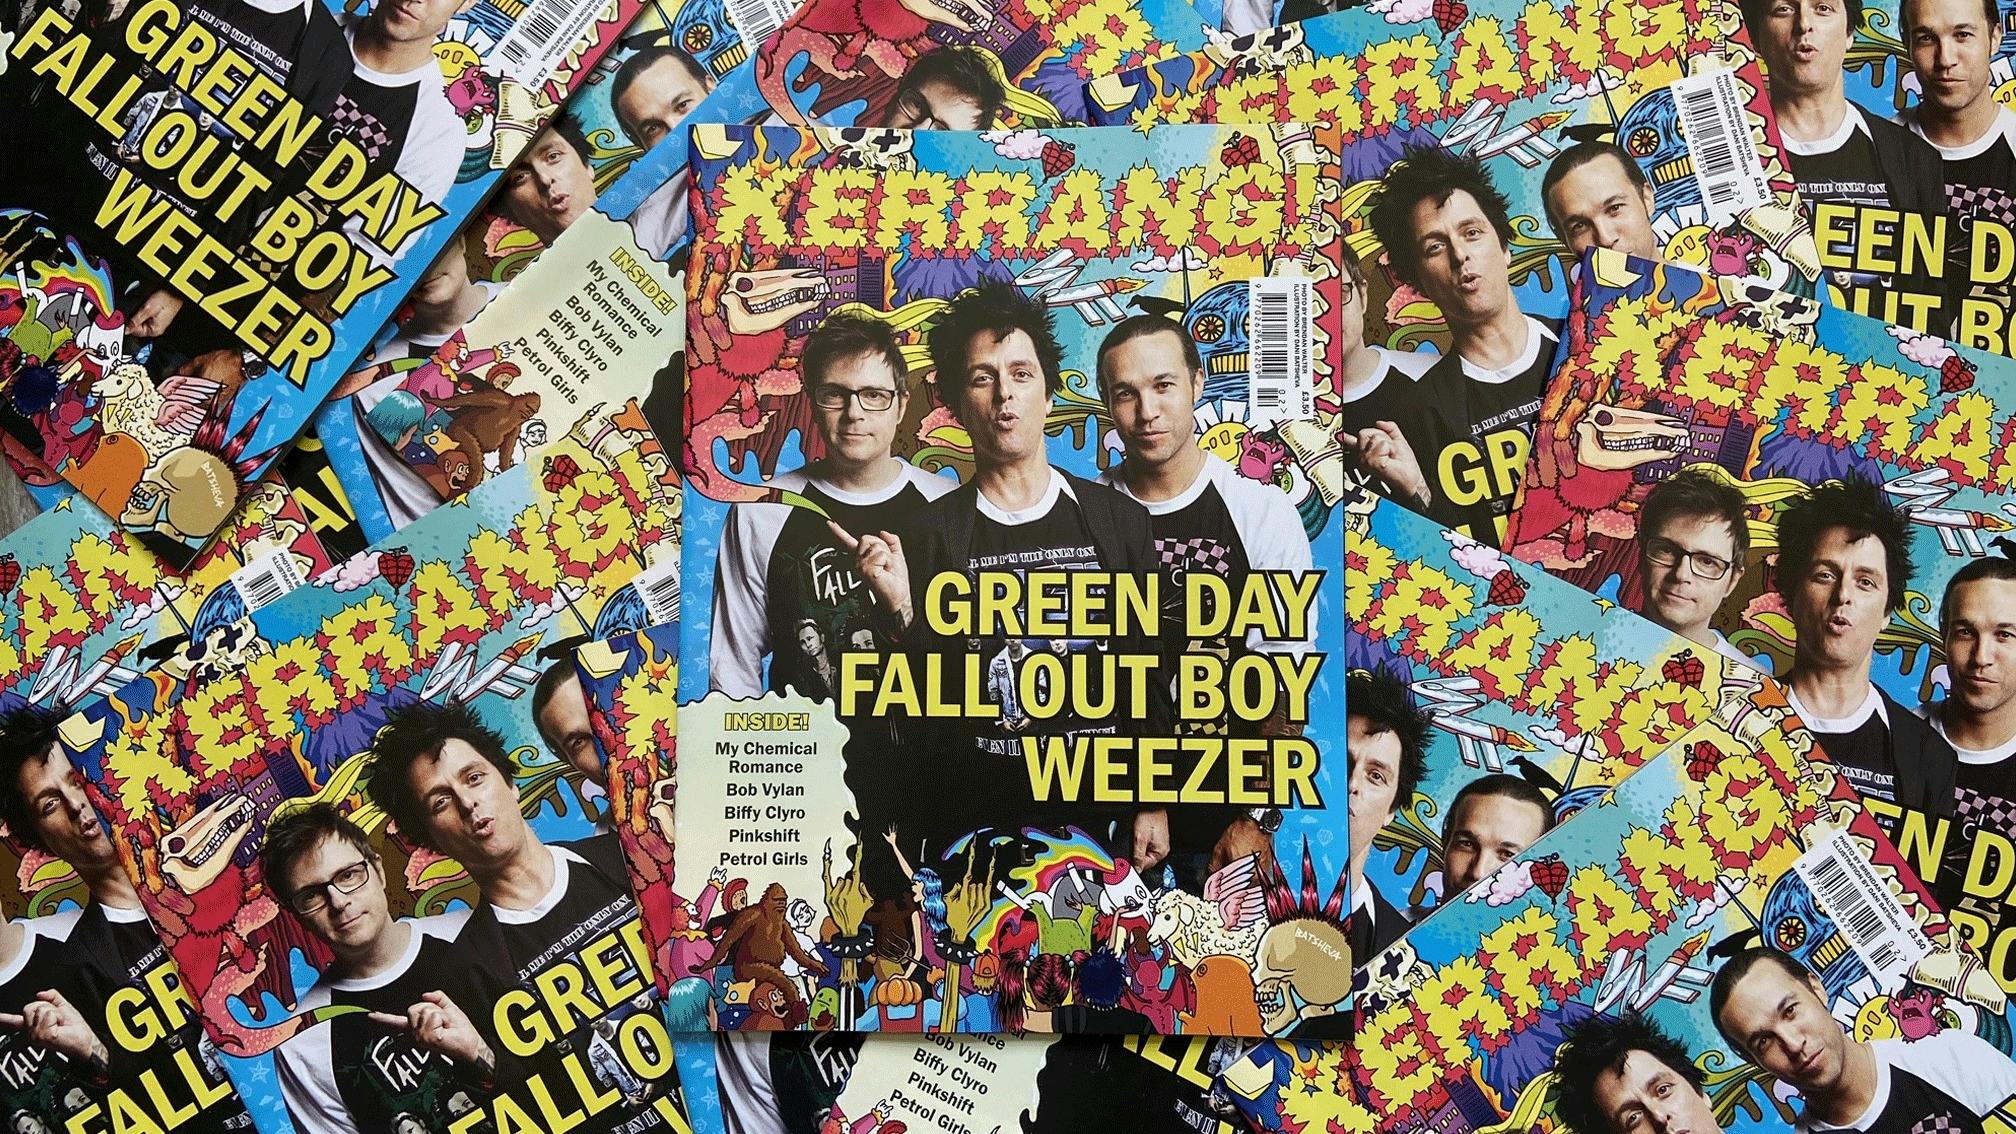 Green Day, Fall Out Boy and Weezer hit the cover of the new Kerrang! magazine